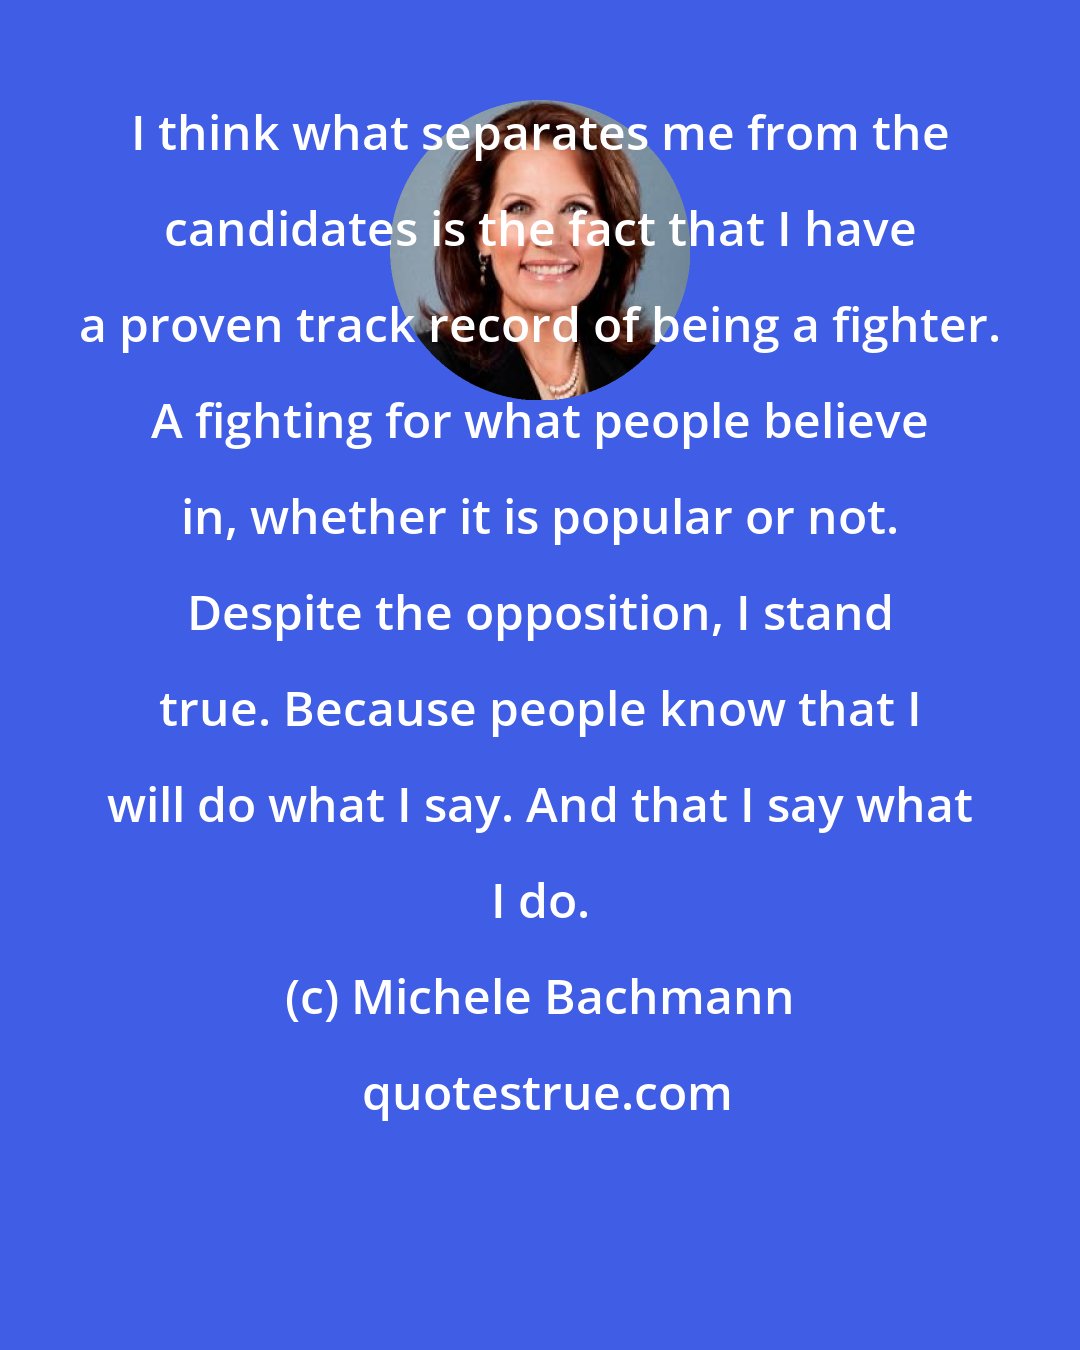 Michele Bachmann: I think what separates me from the candidates is the fact that I have a proven track record of being a fighter. A fighting for what people believe in, whether it is popular or not. Despite the opposition, I stand true. Because people know that I will do what I say. And that I say what I do.